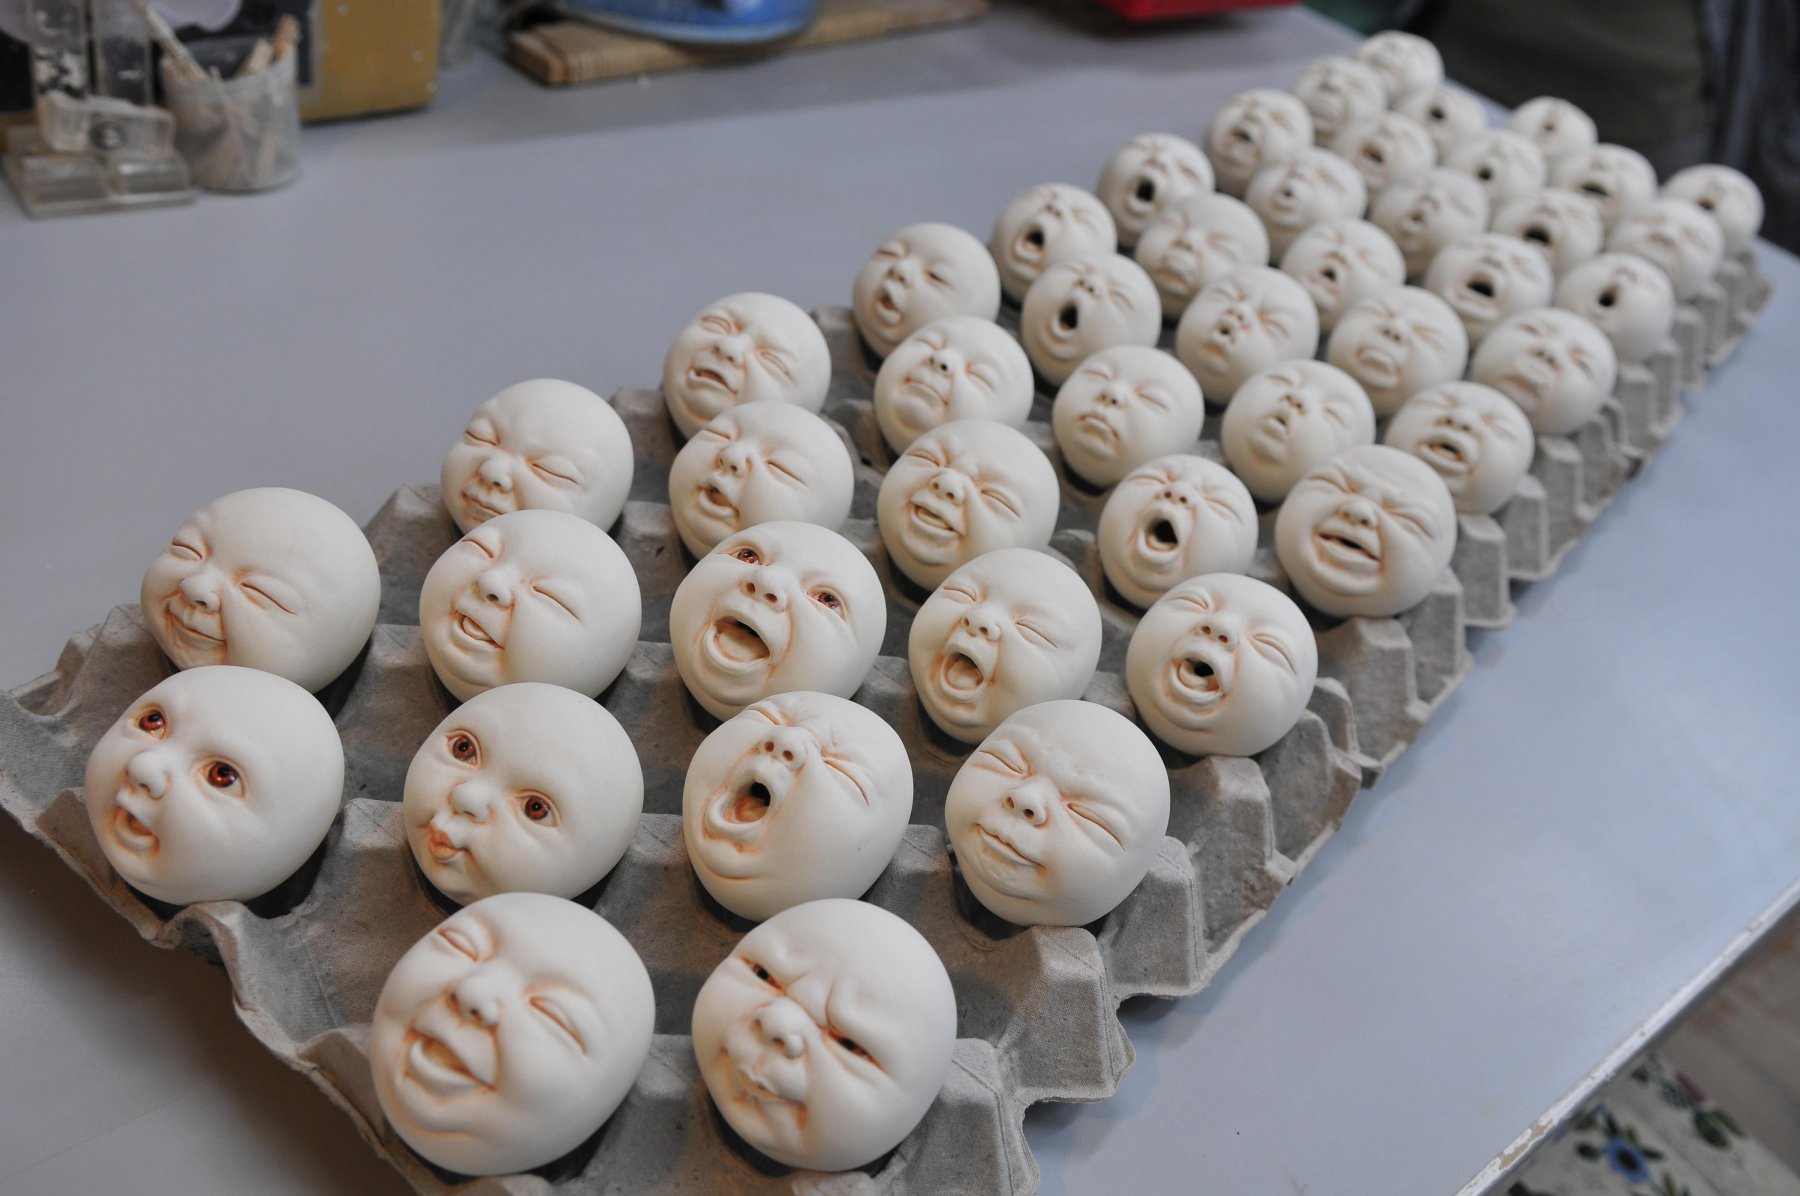 Another project with babies - Johnson Tsang